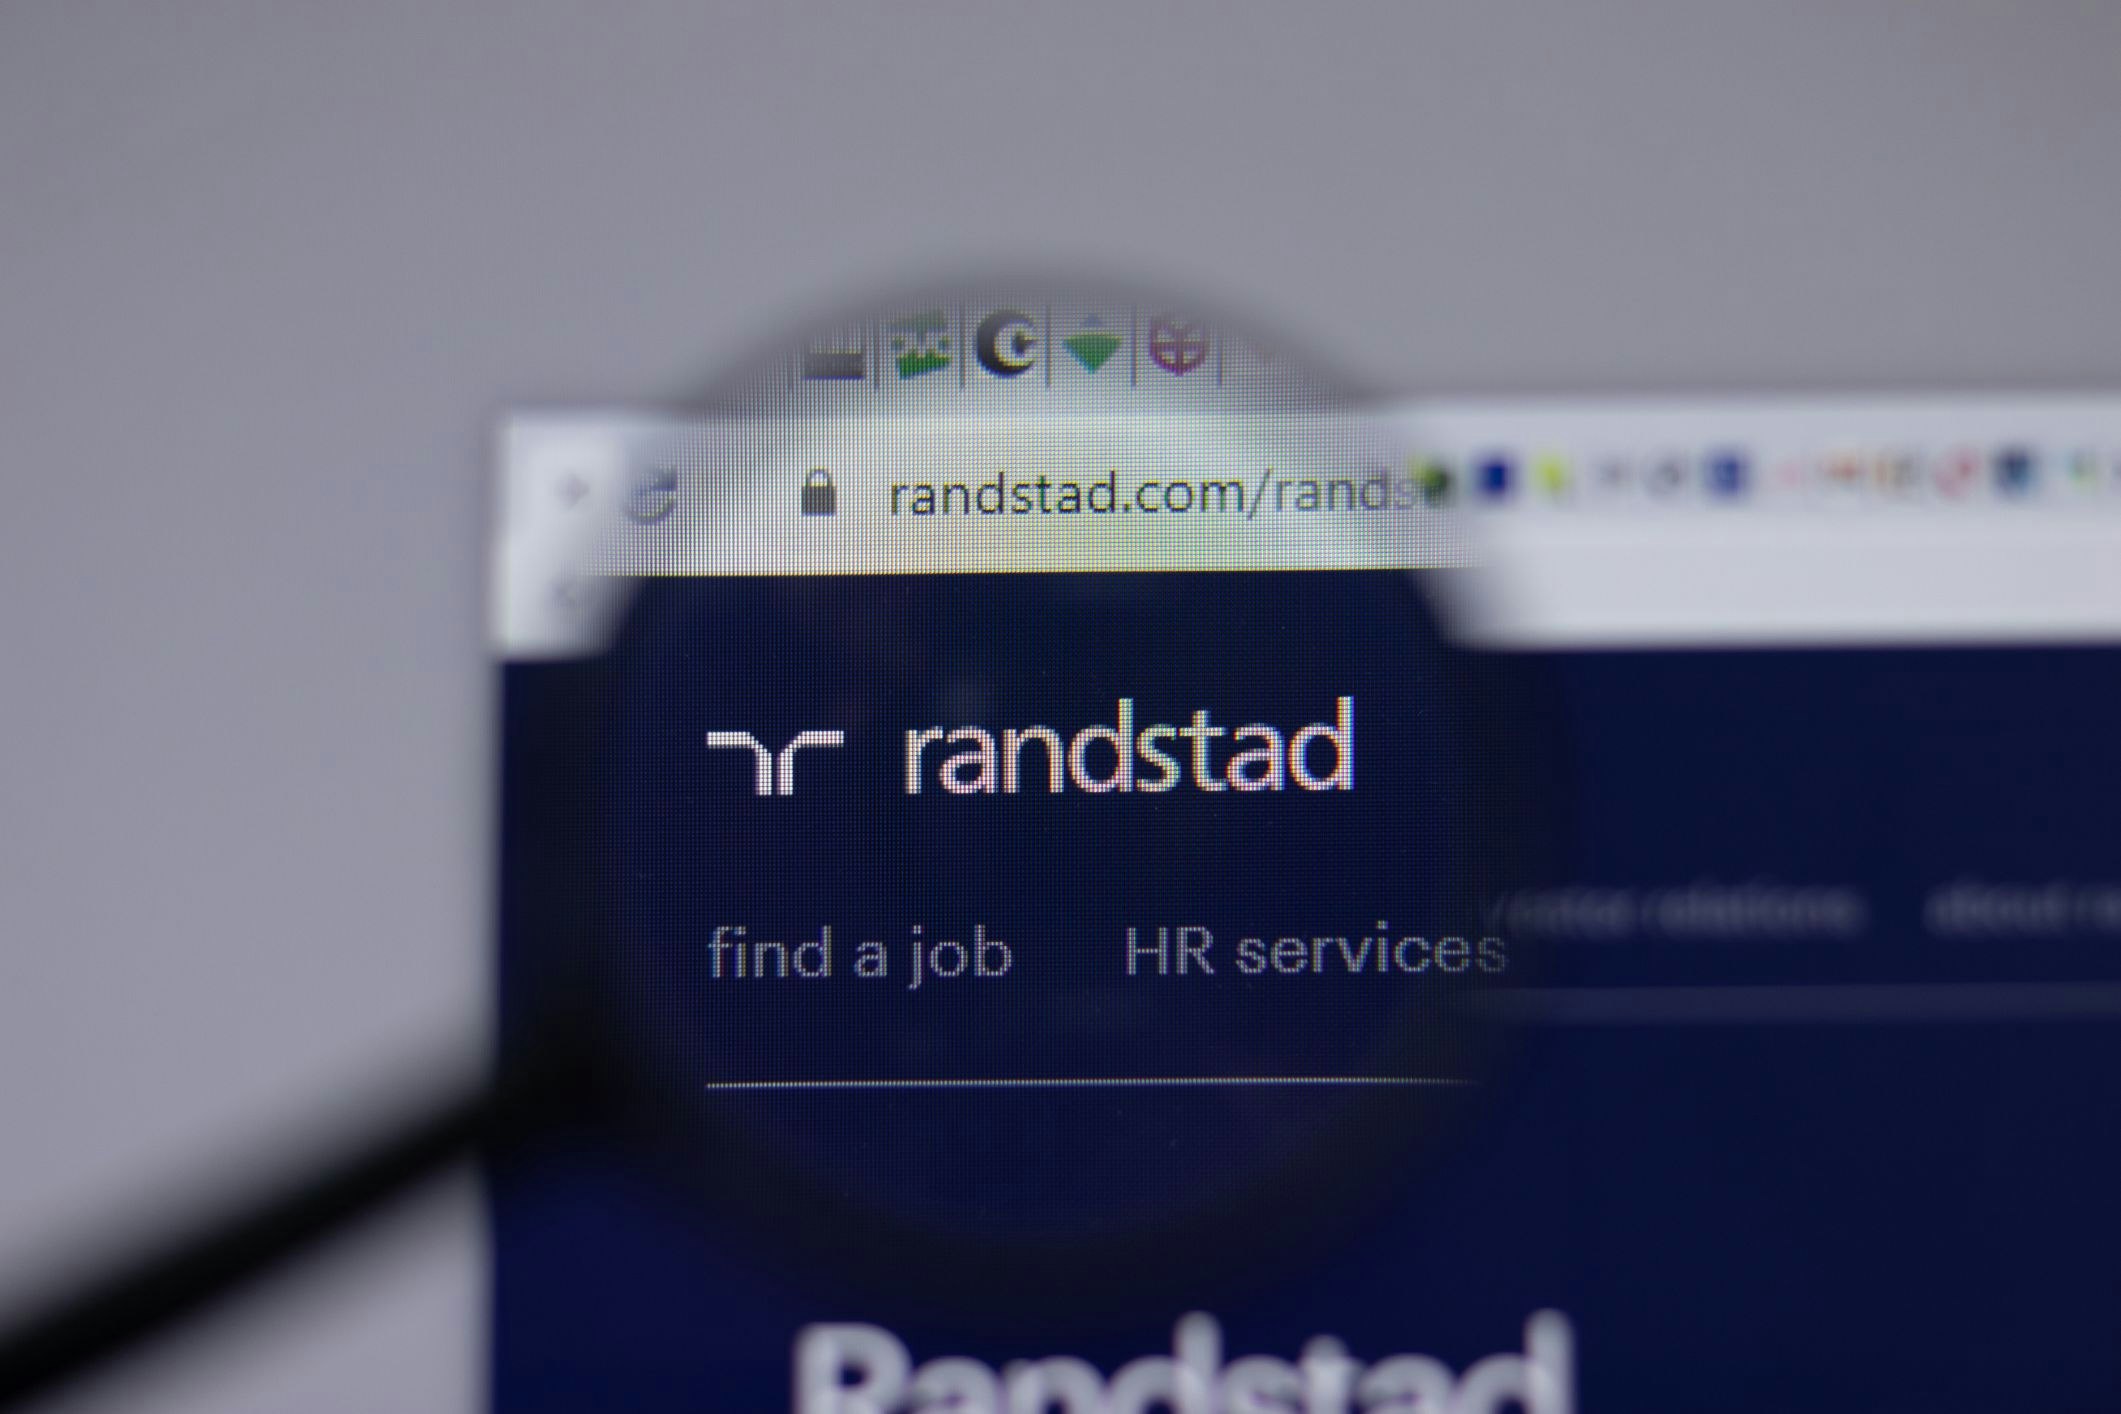 Randstad operates in 38 countries worldwide, but the state of Victoria is a key point of interest, as seen in the new partnership (Source: Postmodern Studio via Shutterstock)
